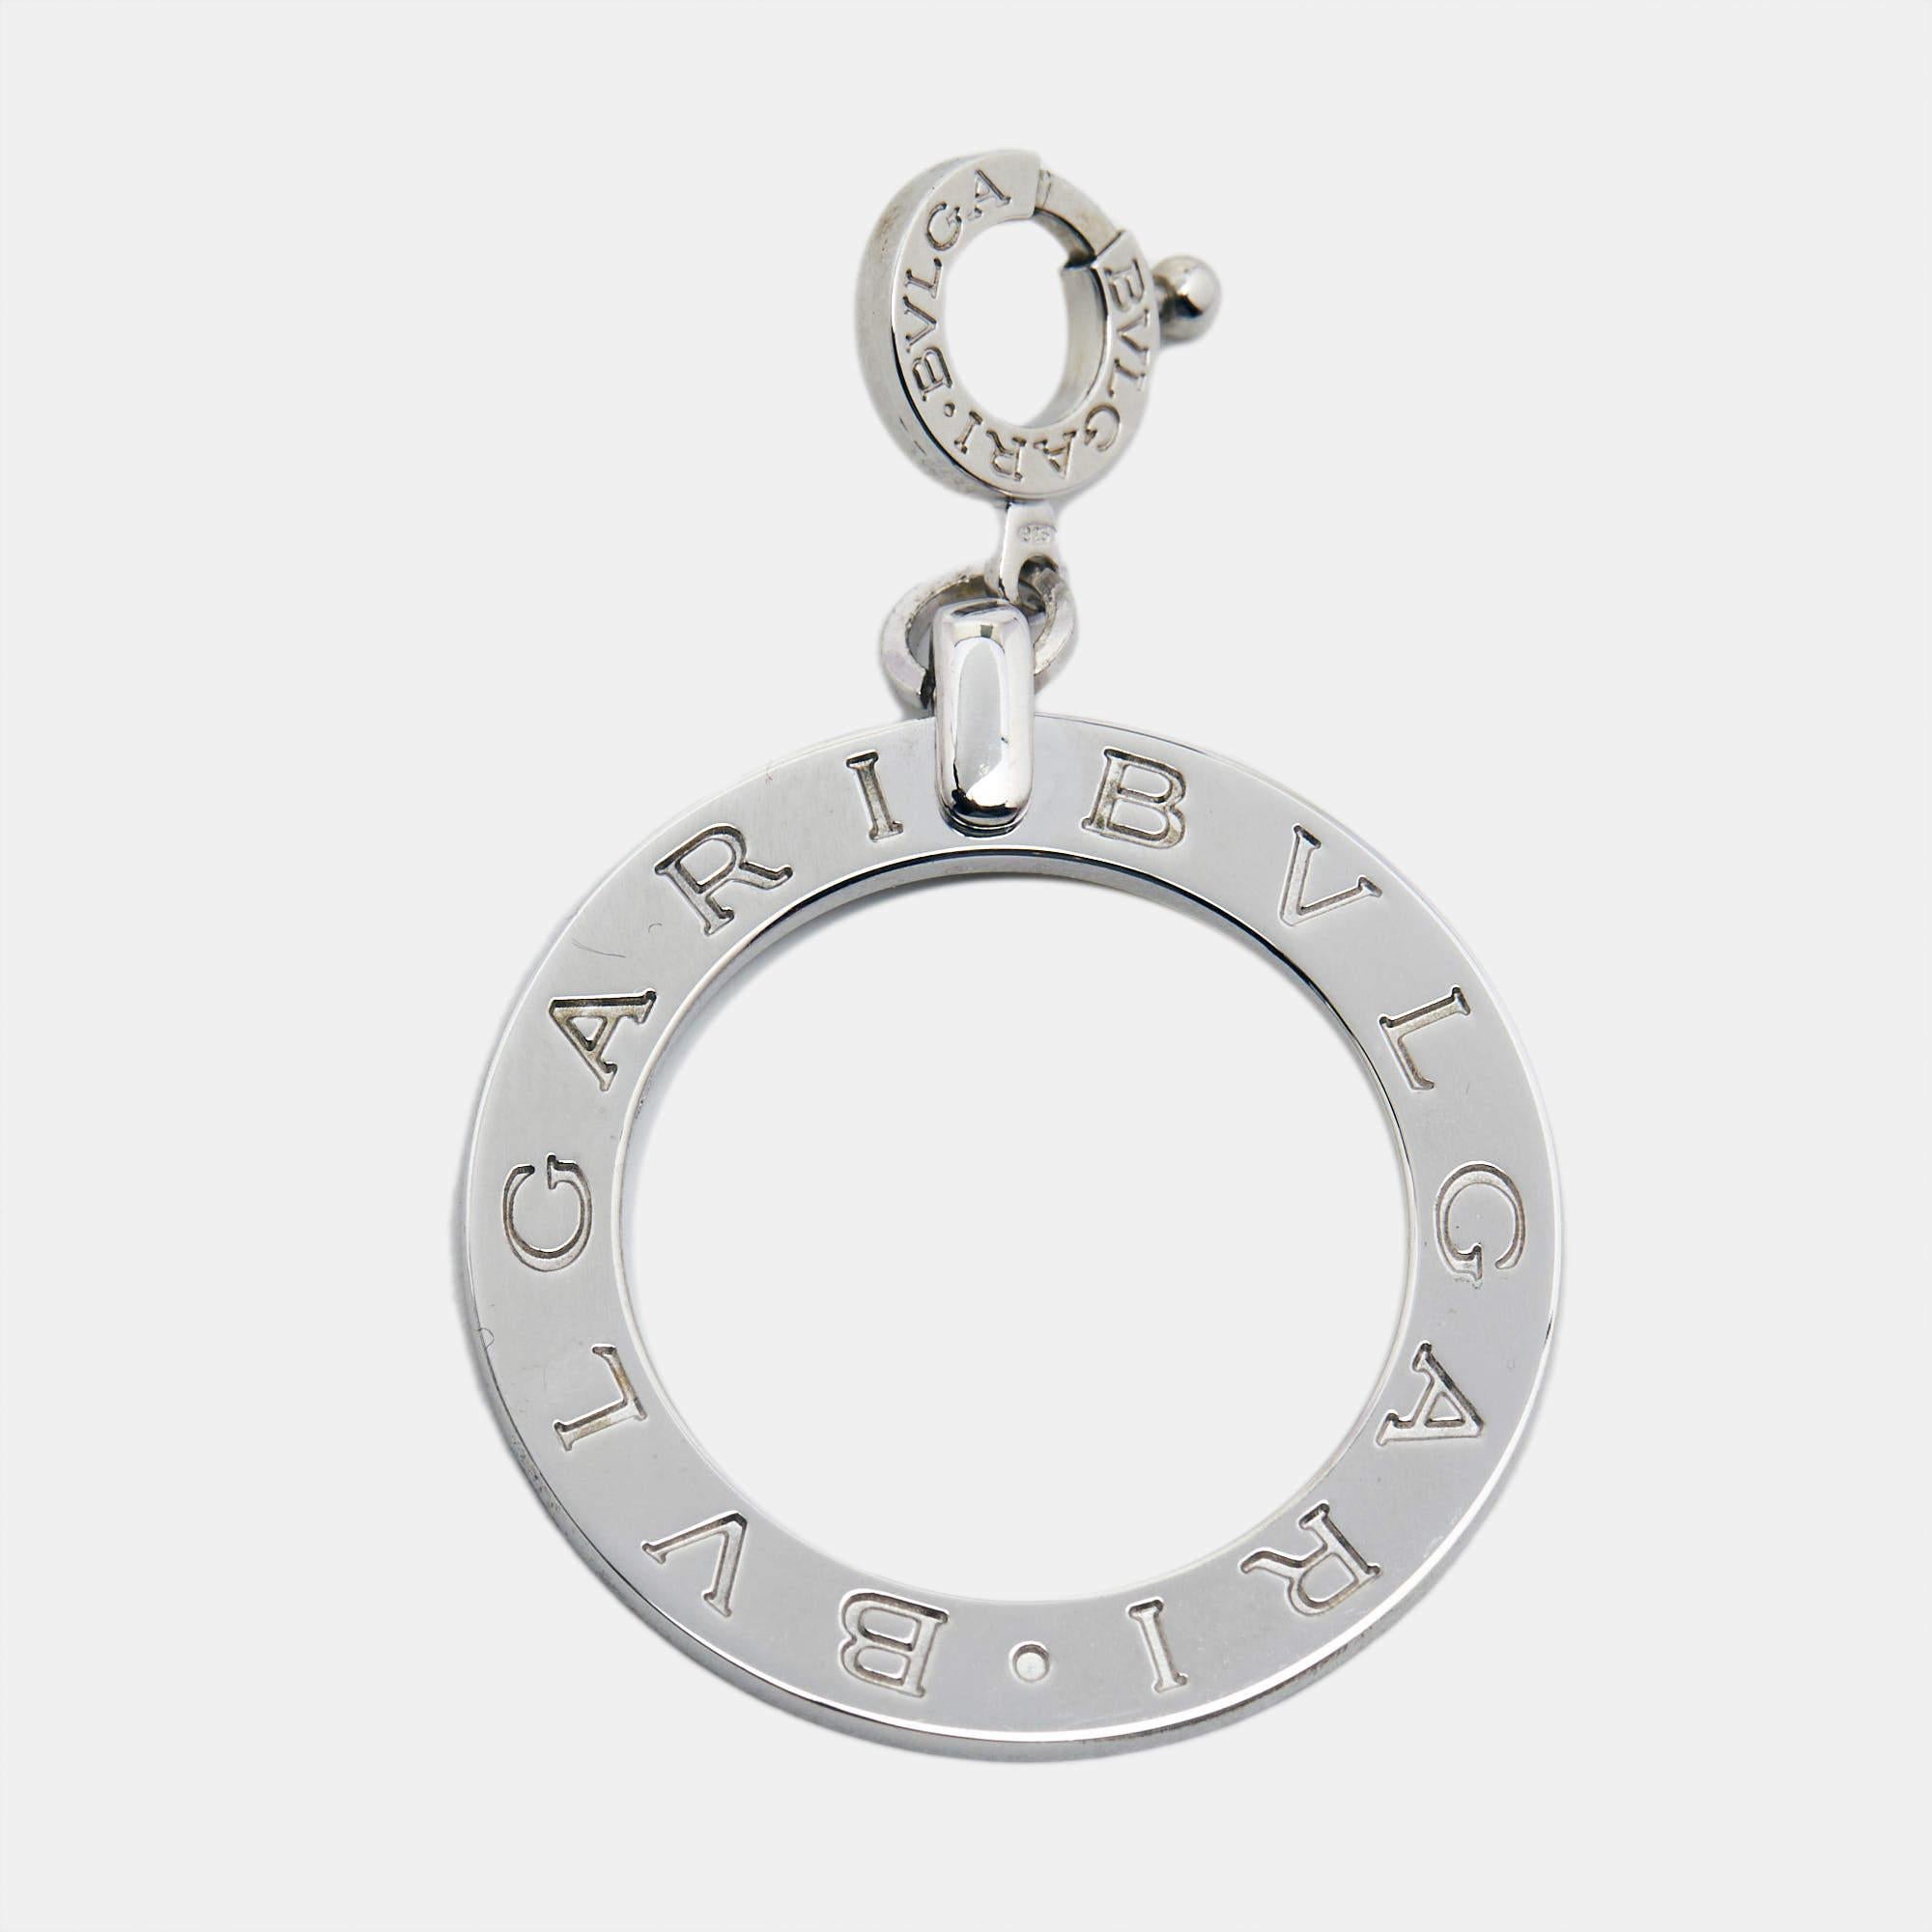 The Bvlgari charm is an exquisite jewelry piece. Crafted from 925 sterling silver, it features the iconic Bvlgari logo engraved on its surface. This charm is versatile, adding a touch of elegance and luxury to any bracelet or necklace.

Includes: